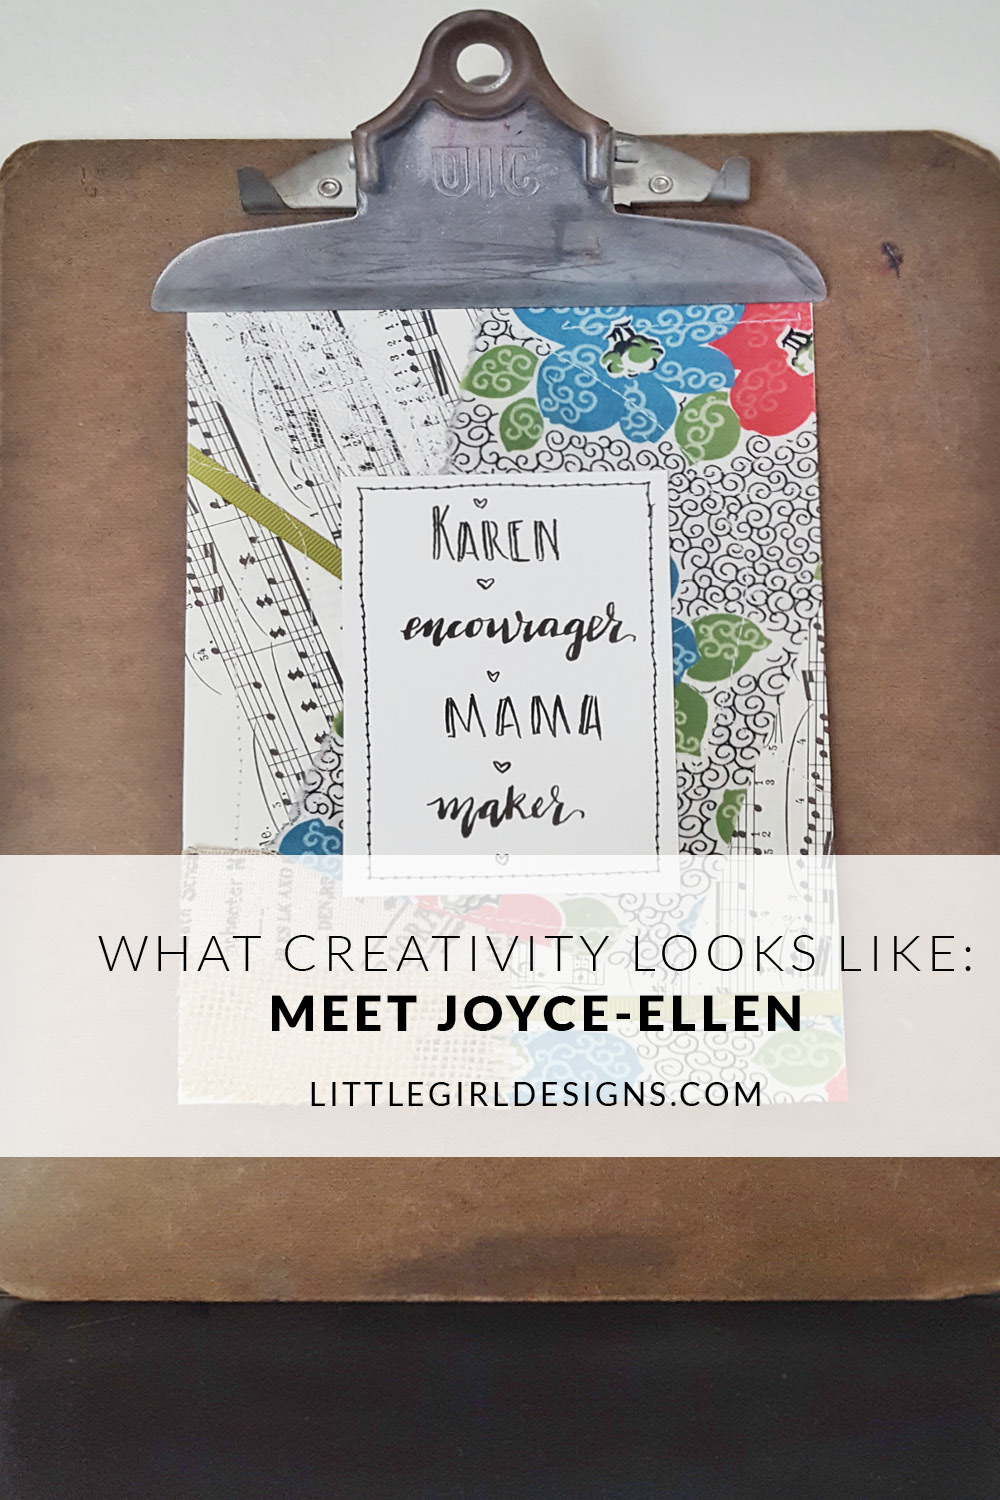 The What Creativity Looks Like series continues this week with Joyce-Ellen, the maker behind BindingRewinding. She makes all kinds of treasures from necklaces to mini happy mail. Learn more about her thoughts re: creativity in this post! :)